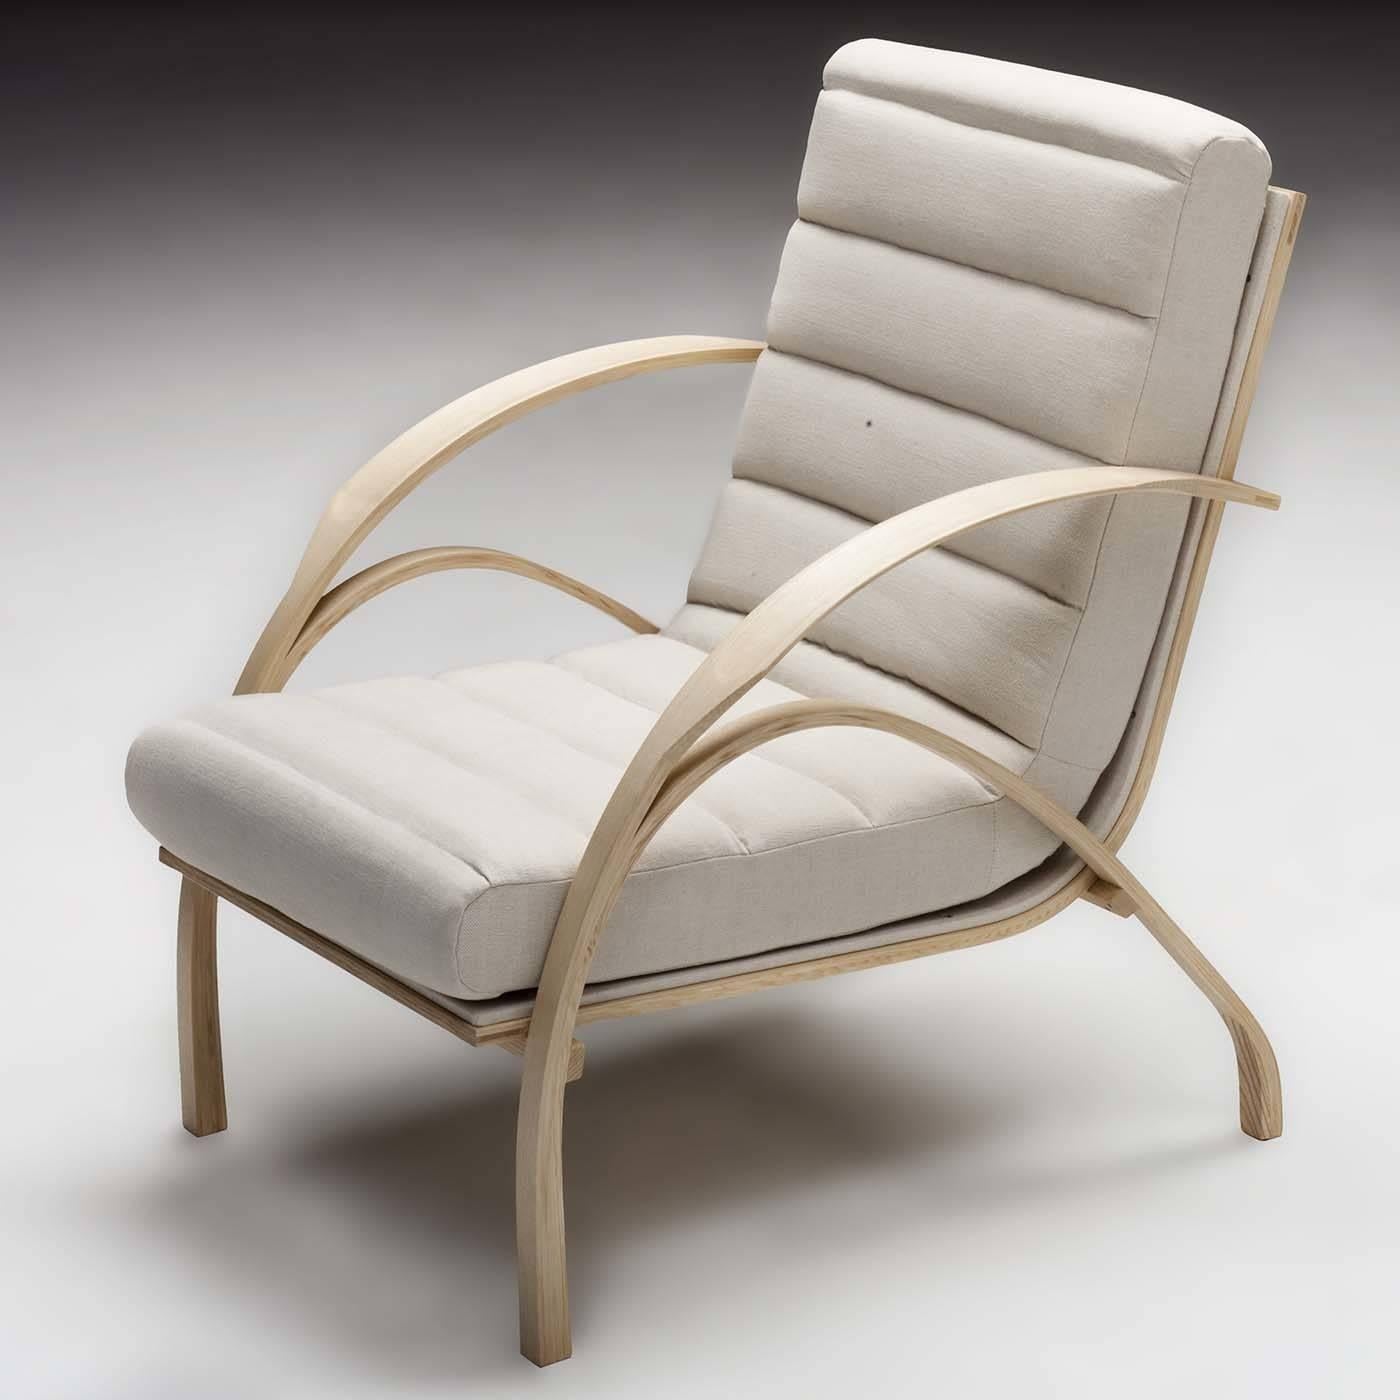 This armchair features a sinuous frame that cradles the comfortable seat and back cushions for ultimate comfort and style. This exquisite piece was originally designed in 1957 by master designer Carlo De Carli. In 2011 it was presented by La